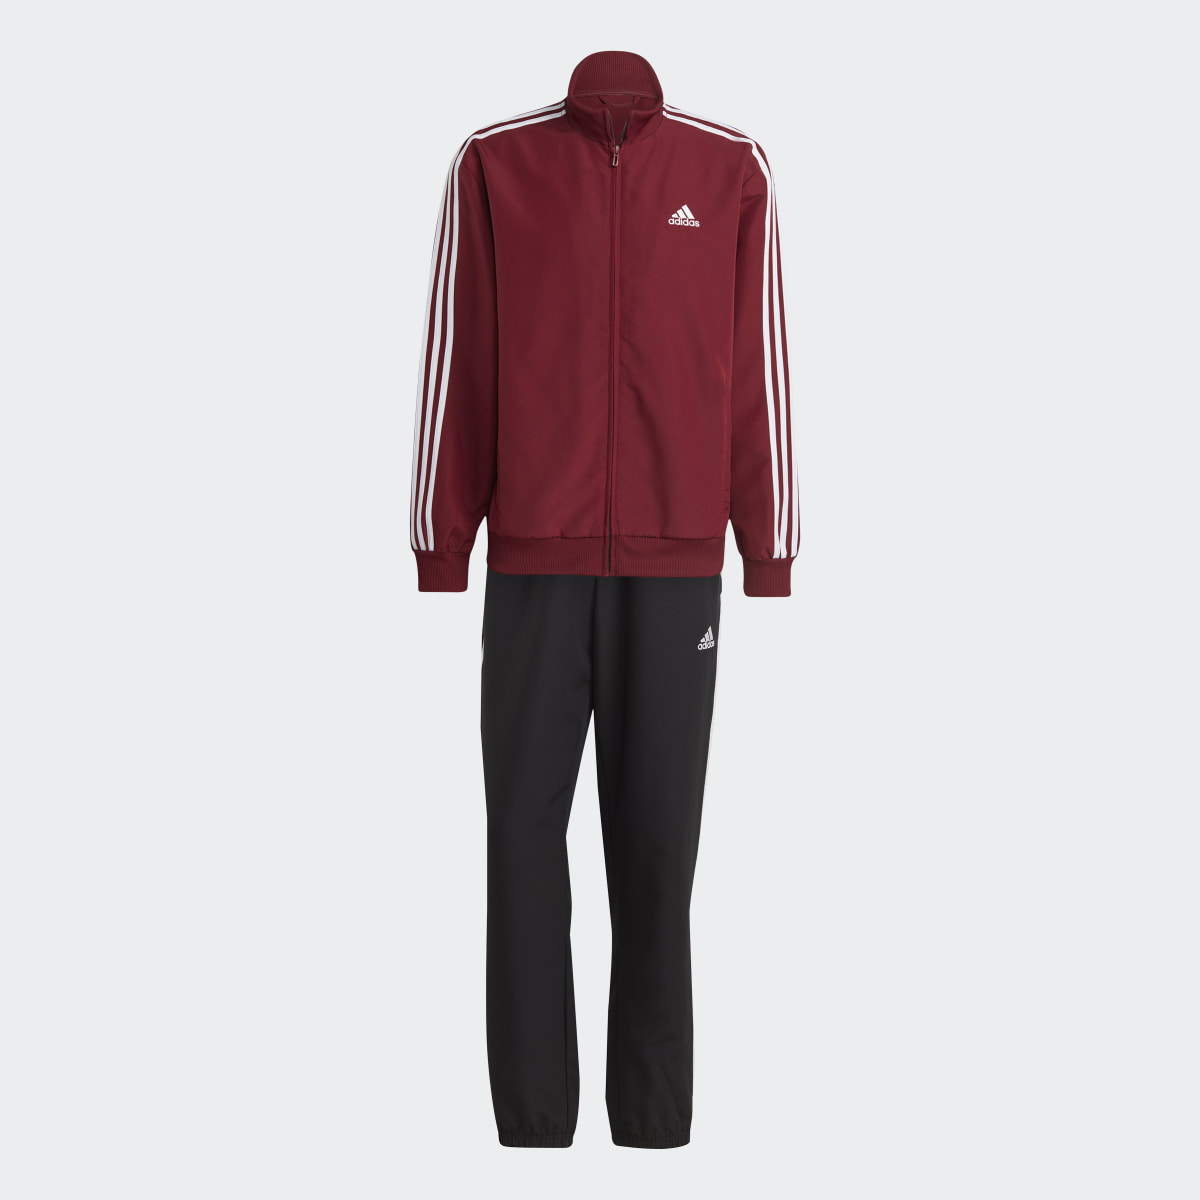 Adidas 3-Stripes Woven Track Suit. 5